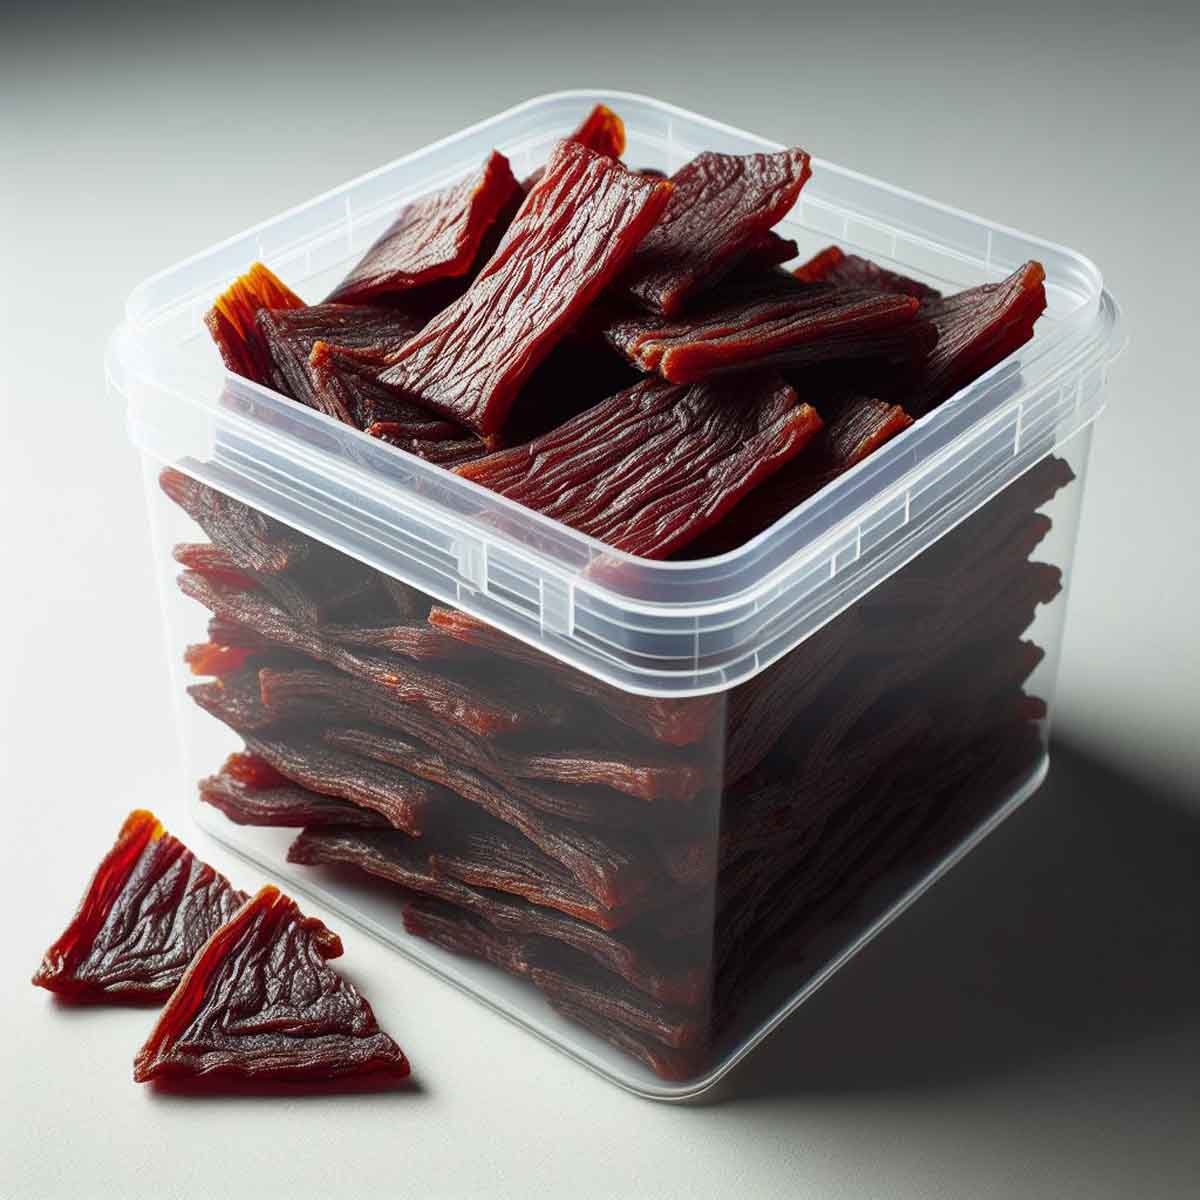 Beef jerky stored in a clear airtight container, showcasing its rich texture.